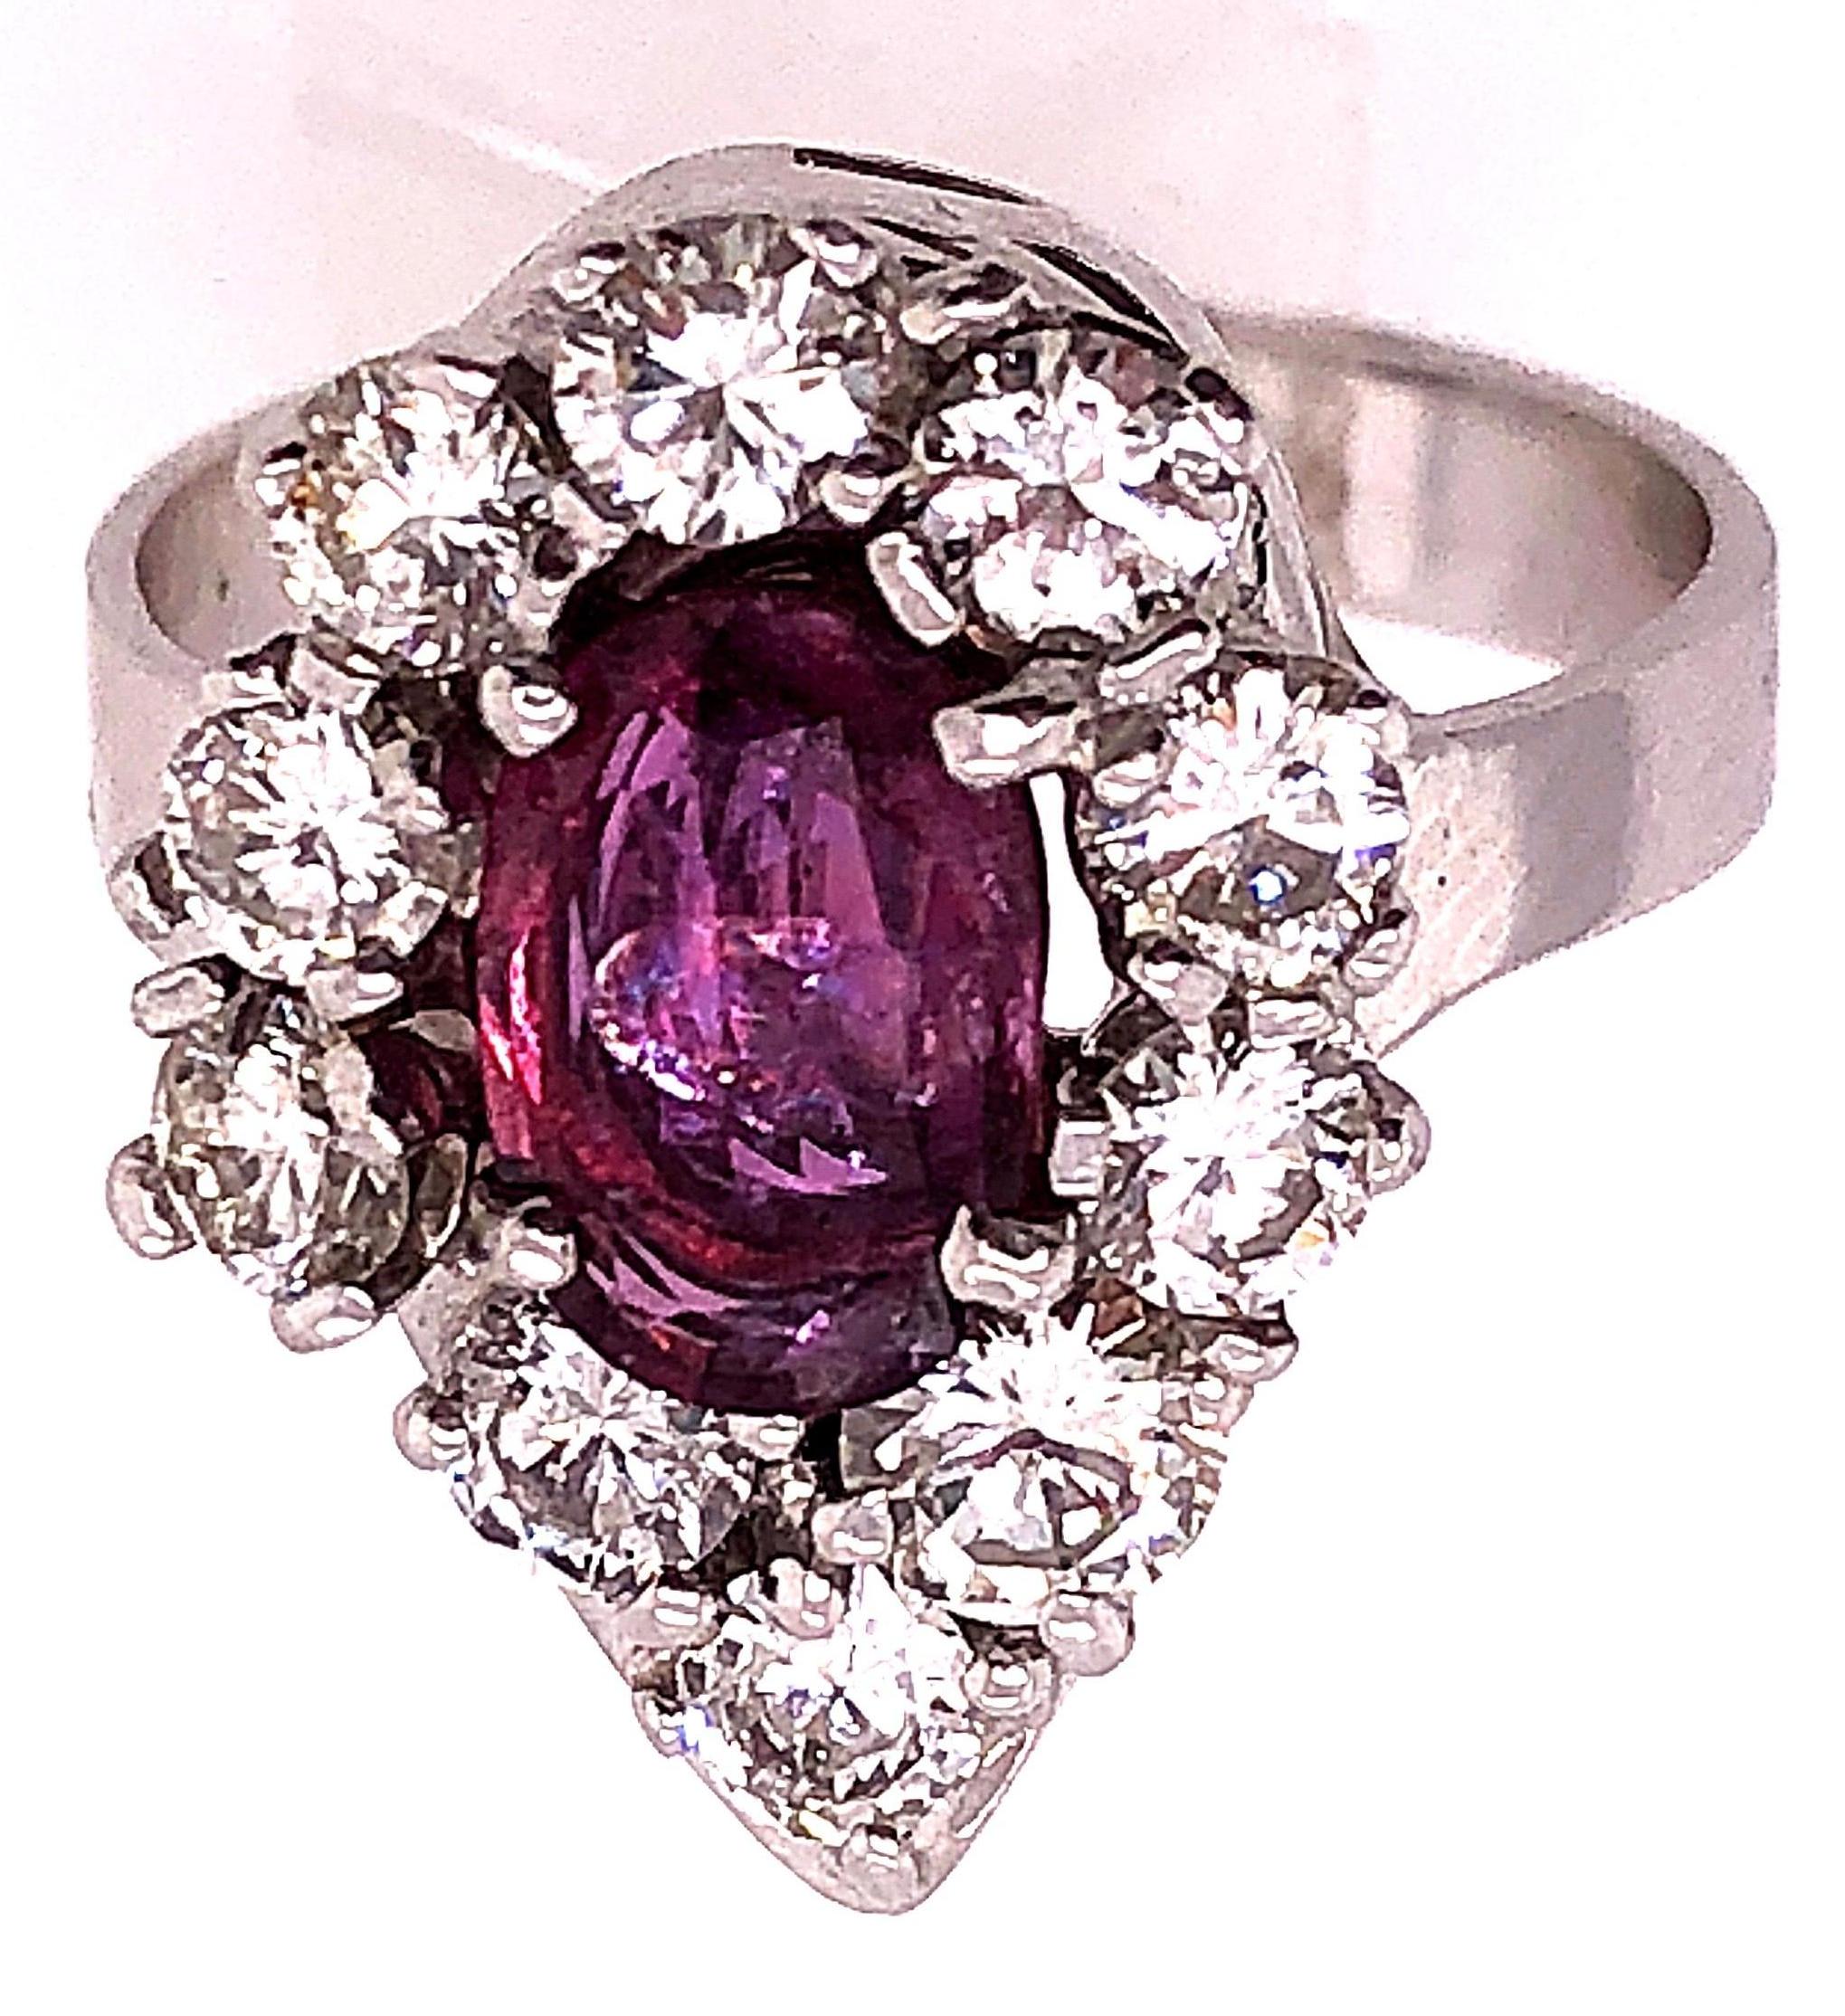 14 Karat White Gold Fashion Oval Ruby Ring with Round Diamonds.
1.50 total diamond weight.
1.25 total ruby weight
Size 7.25
Height: 20 mm
Width: 14 mm 
6.21 grams total weight.
